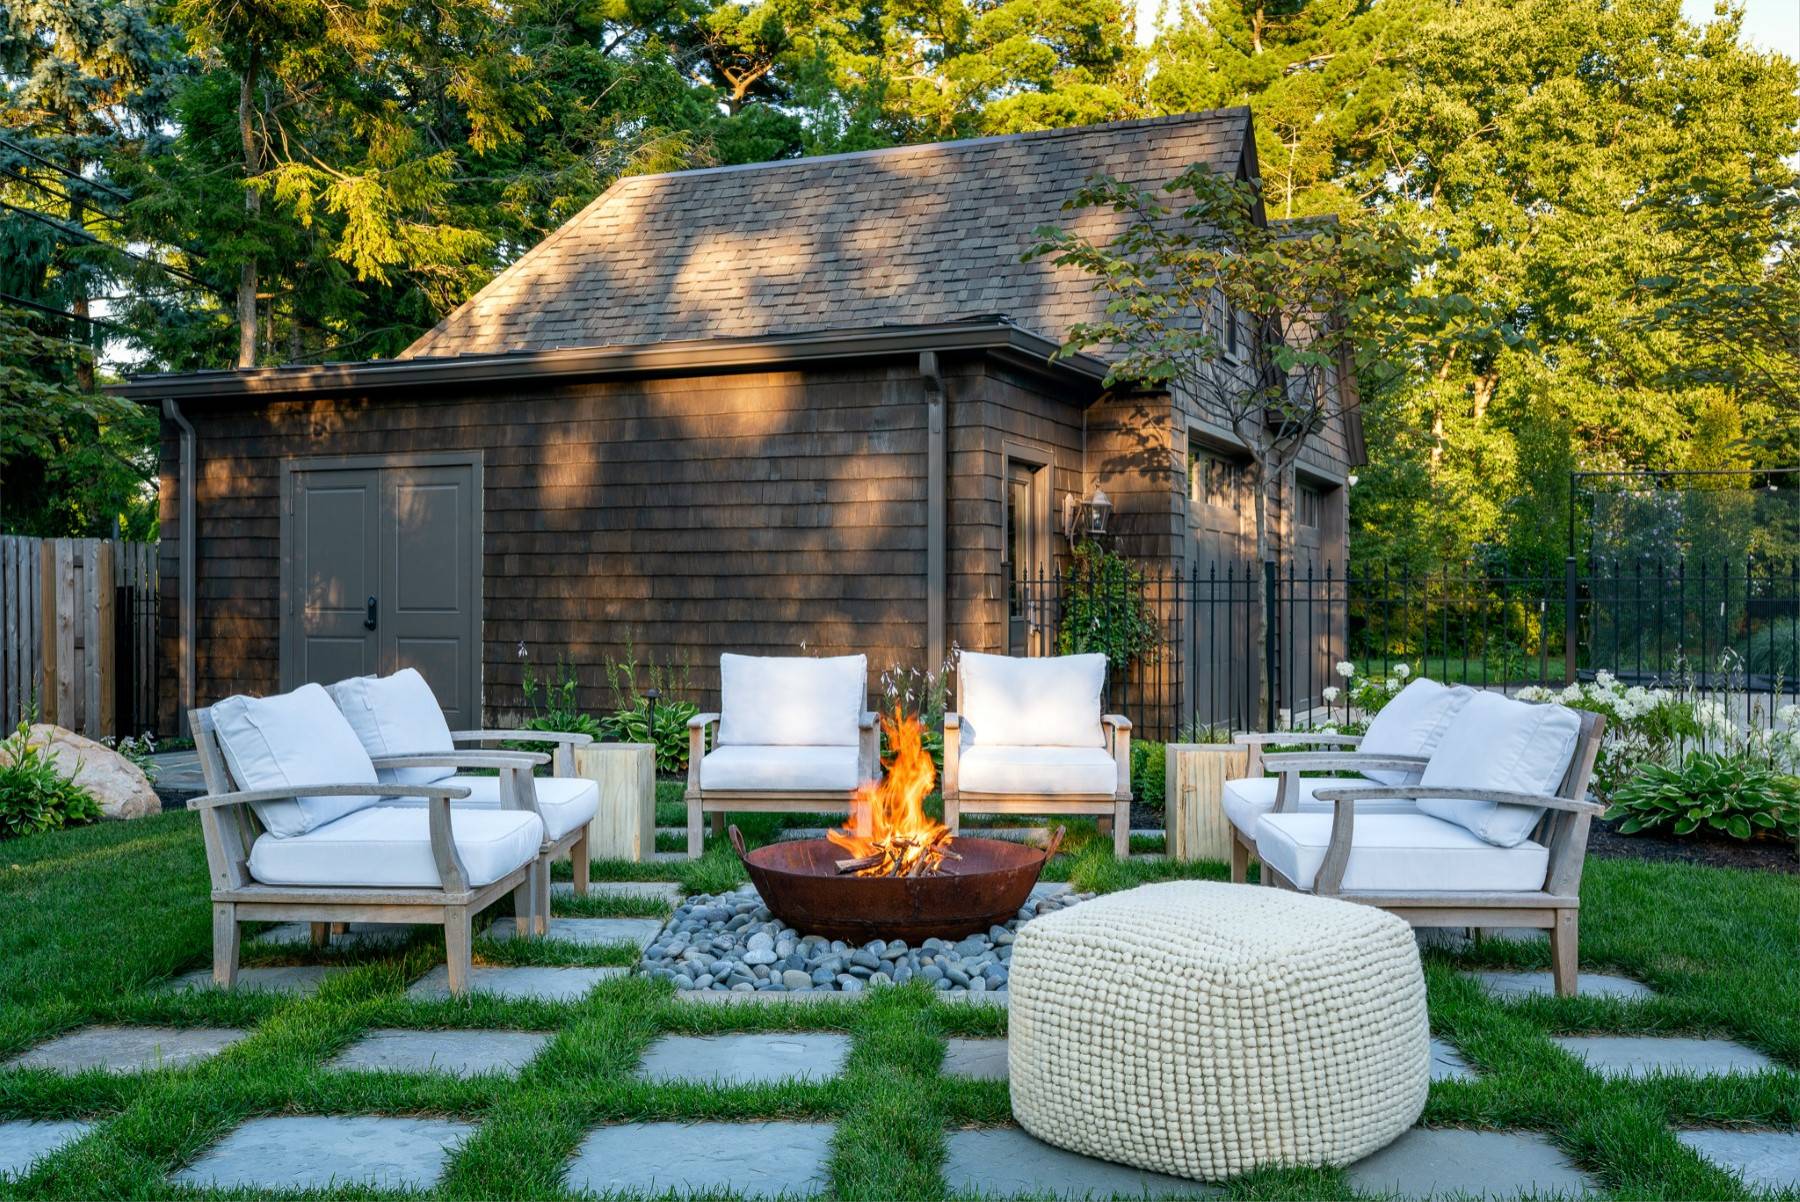 Keep the color cohesive for your living room and outdoor seating area (from Houzz)